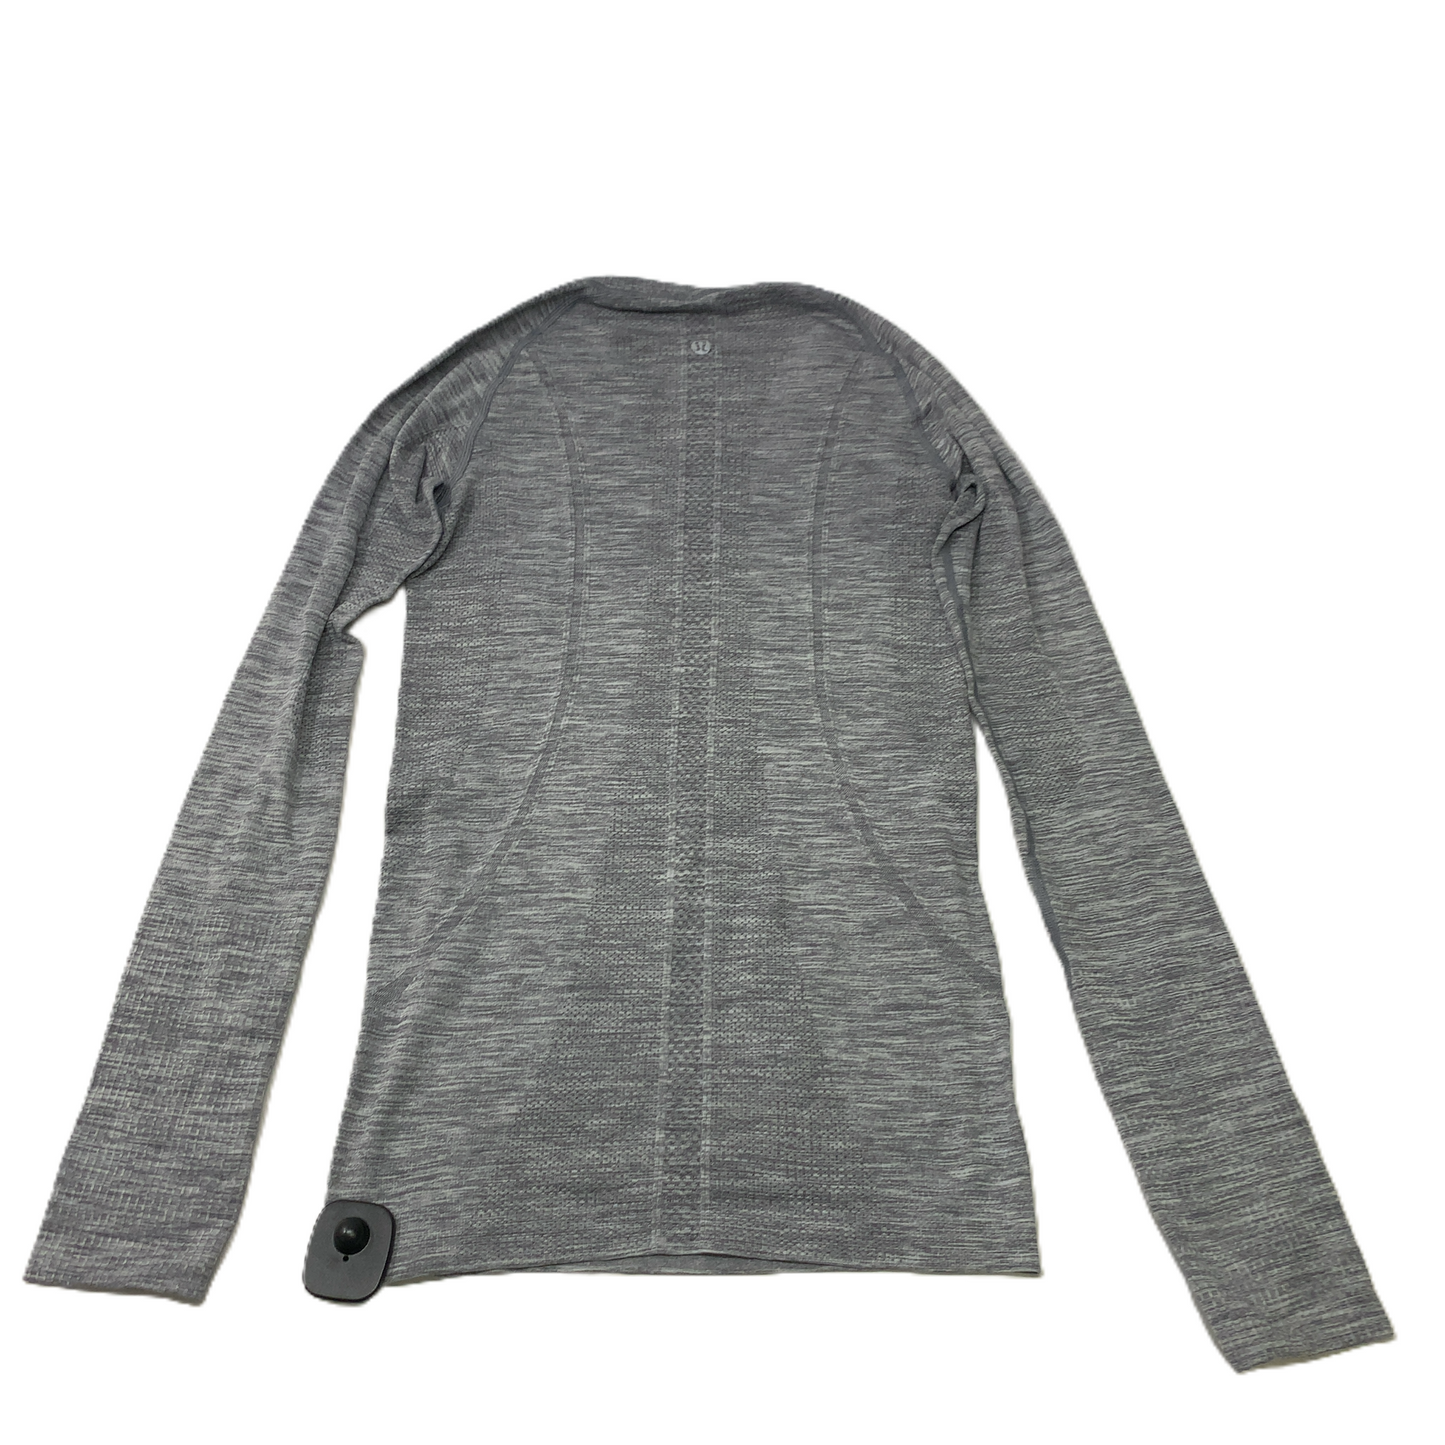 Grey  Athletic Top Long Sleeve Collar By Lululemon  Size: S